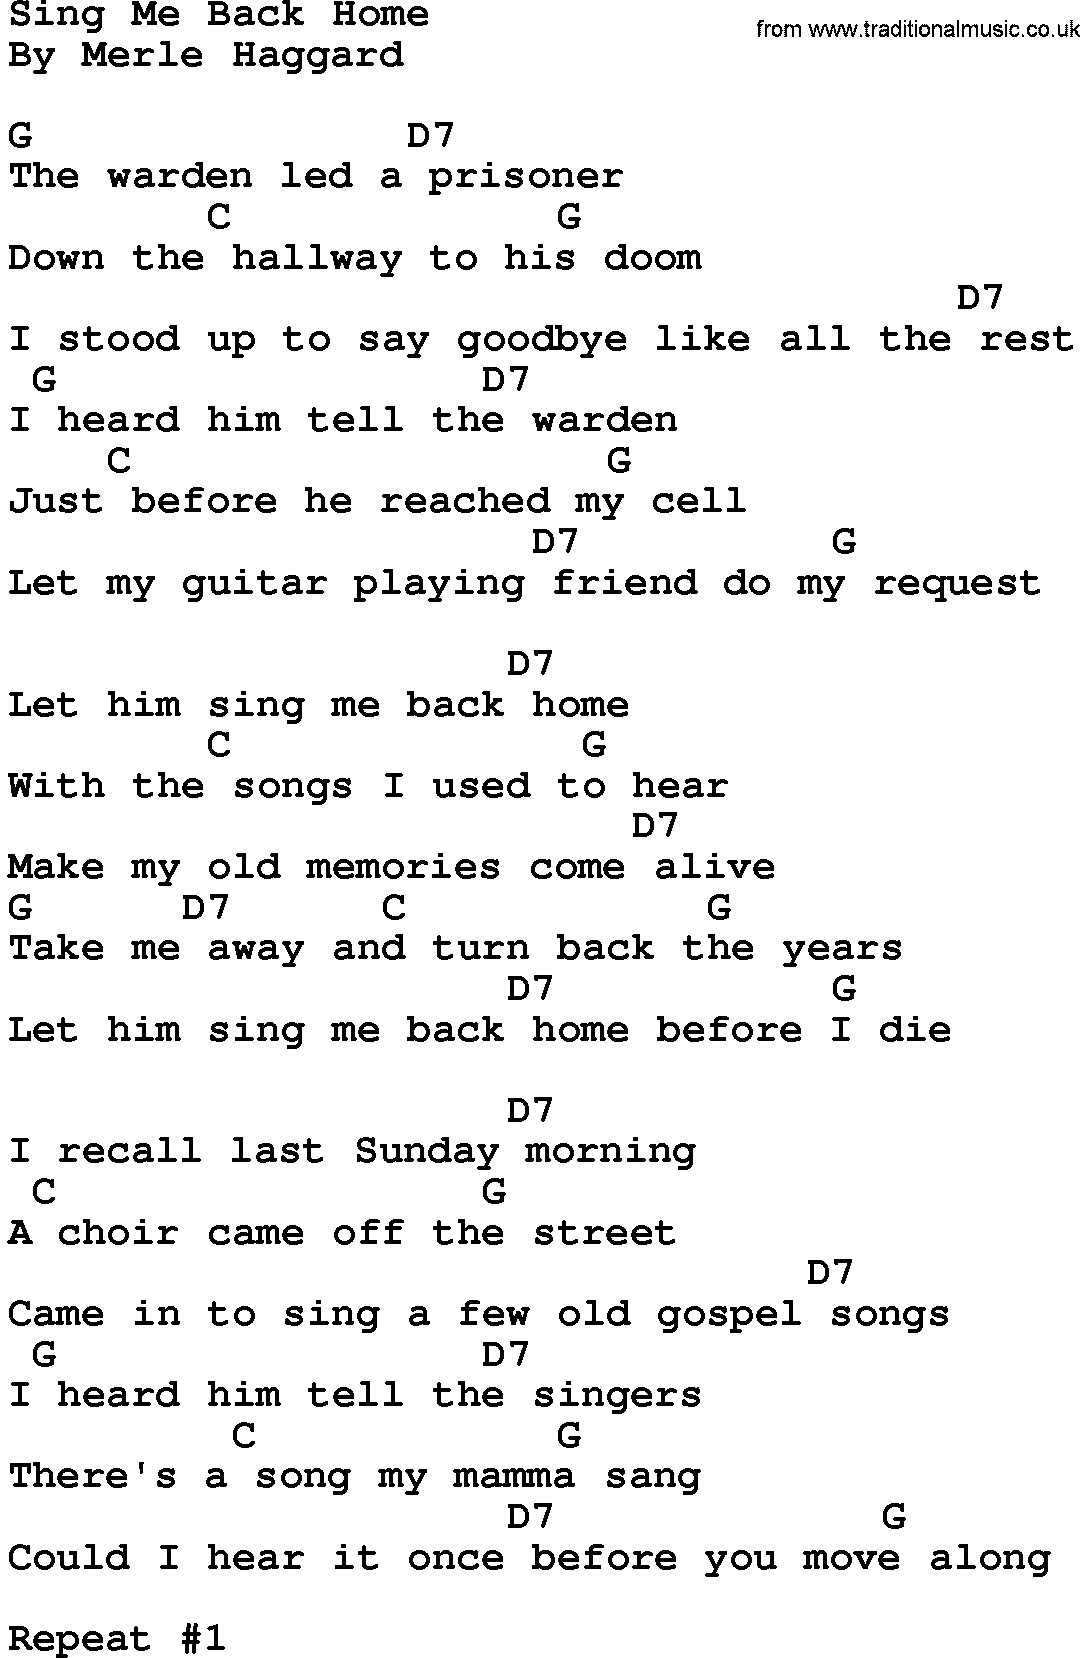 Country music song: Sing Me Back Home lyrics and chords